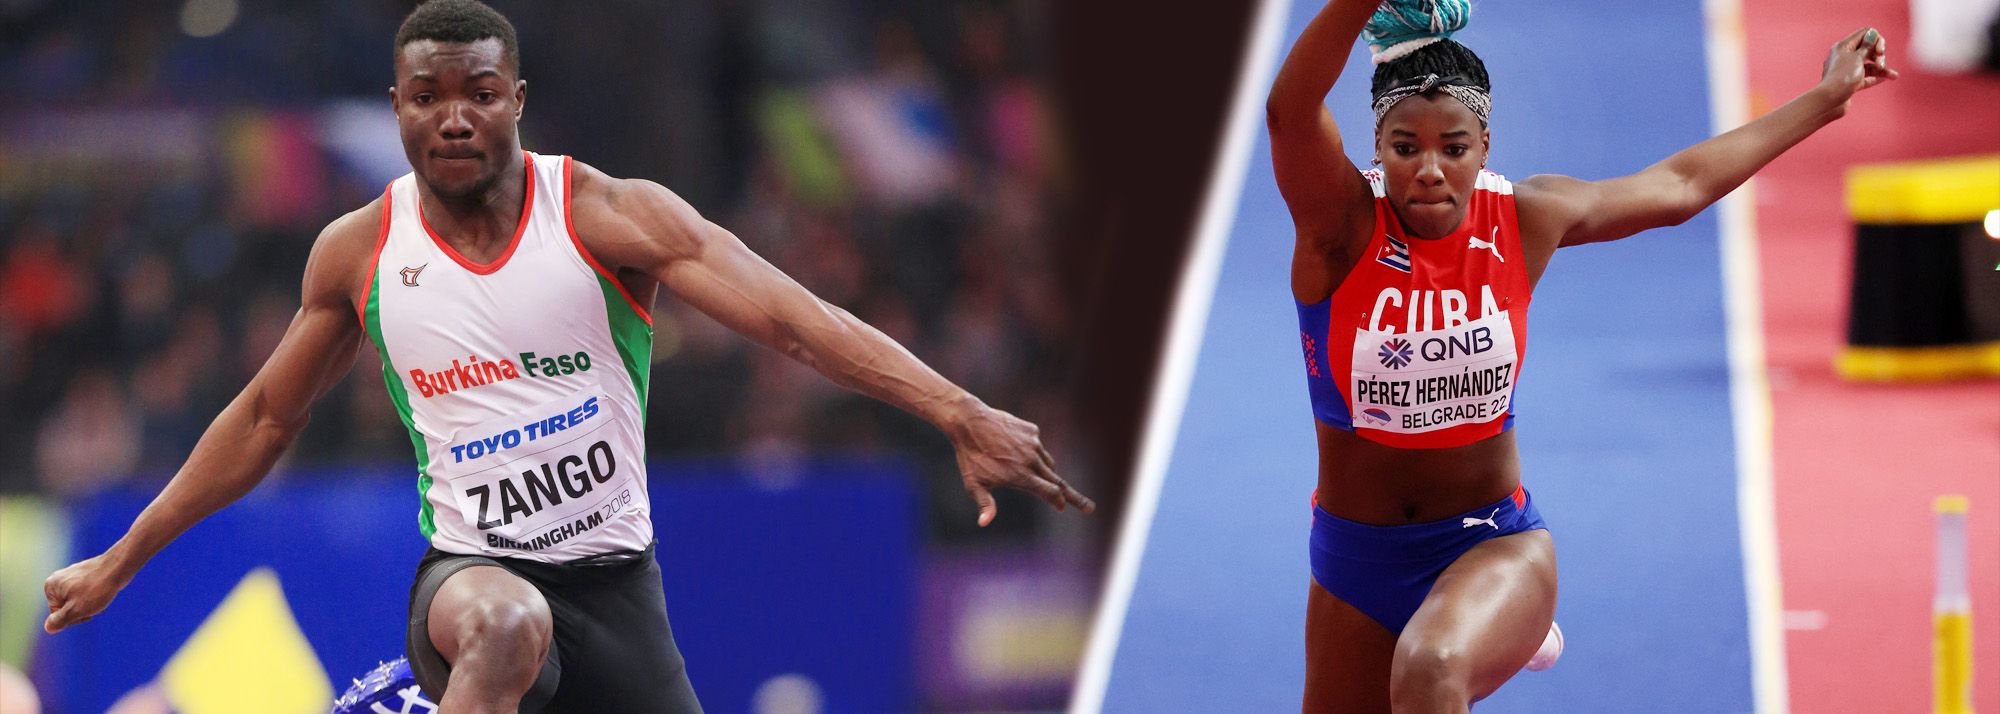 Expected highlights in the men's and women's triple jump